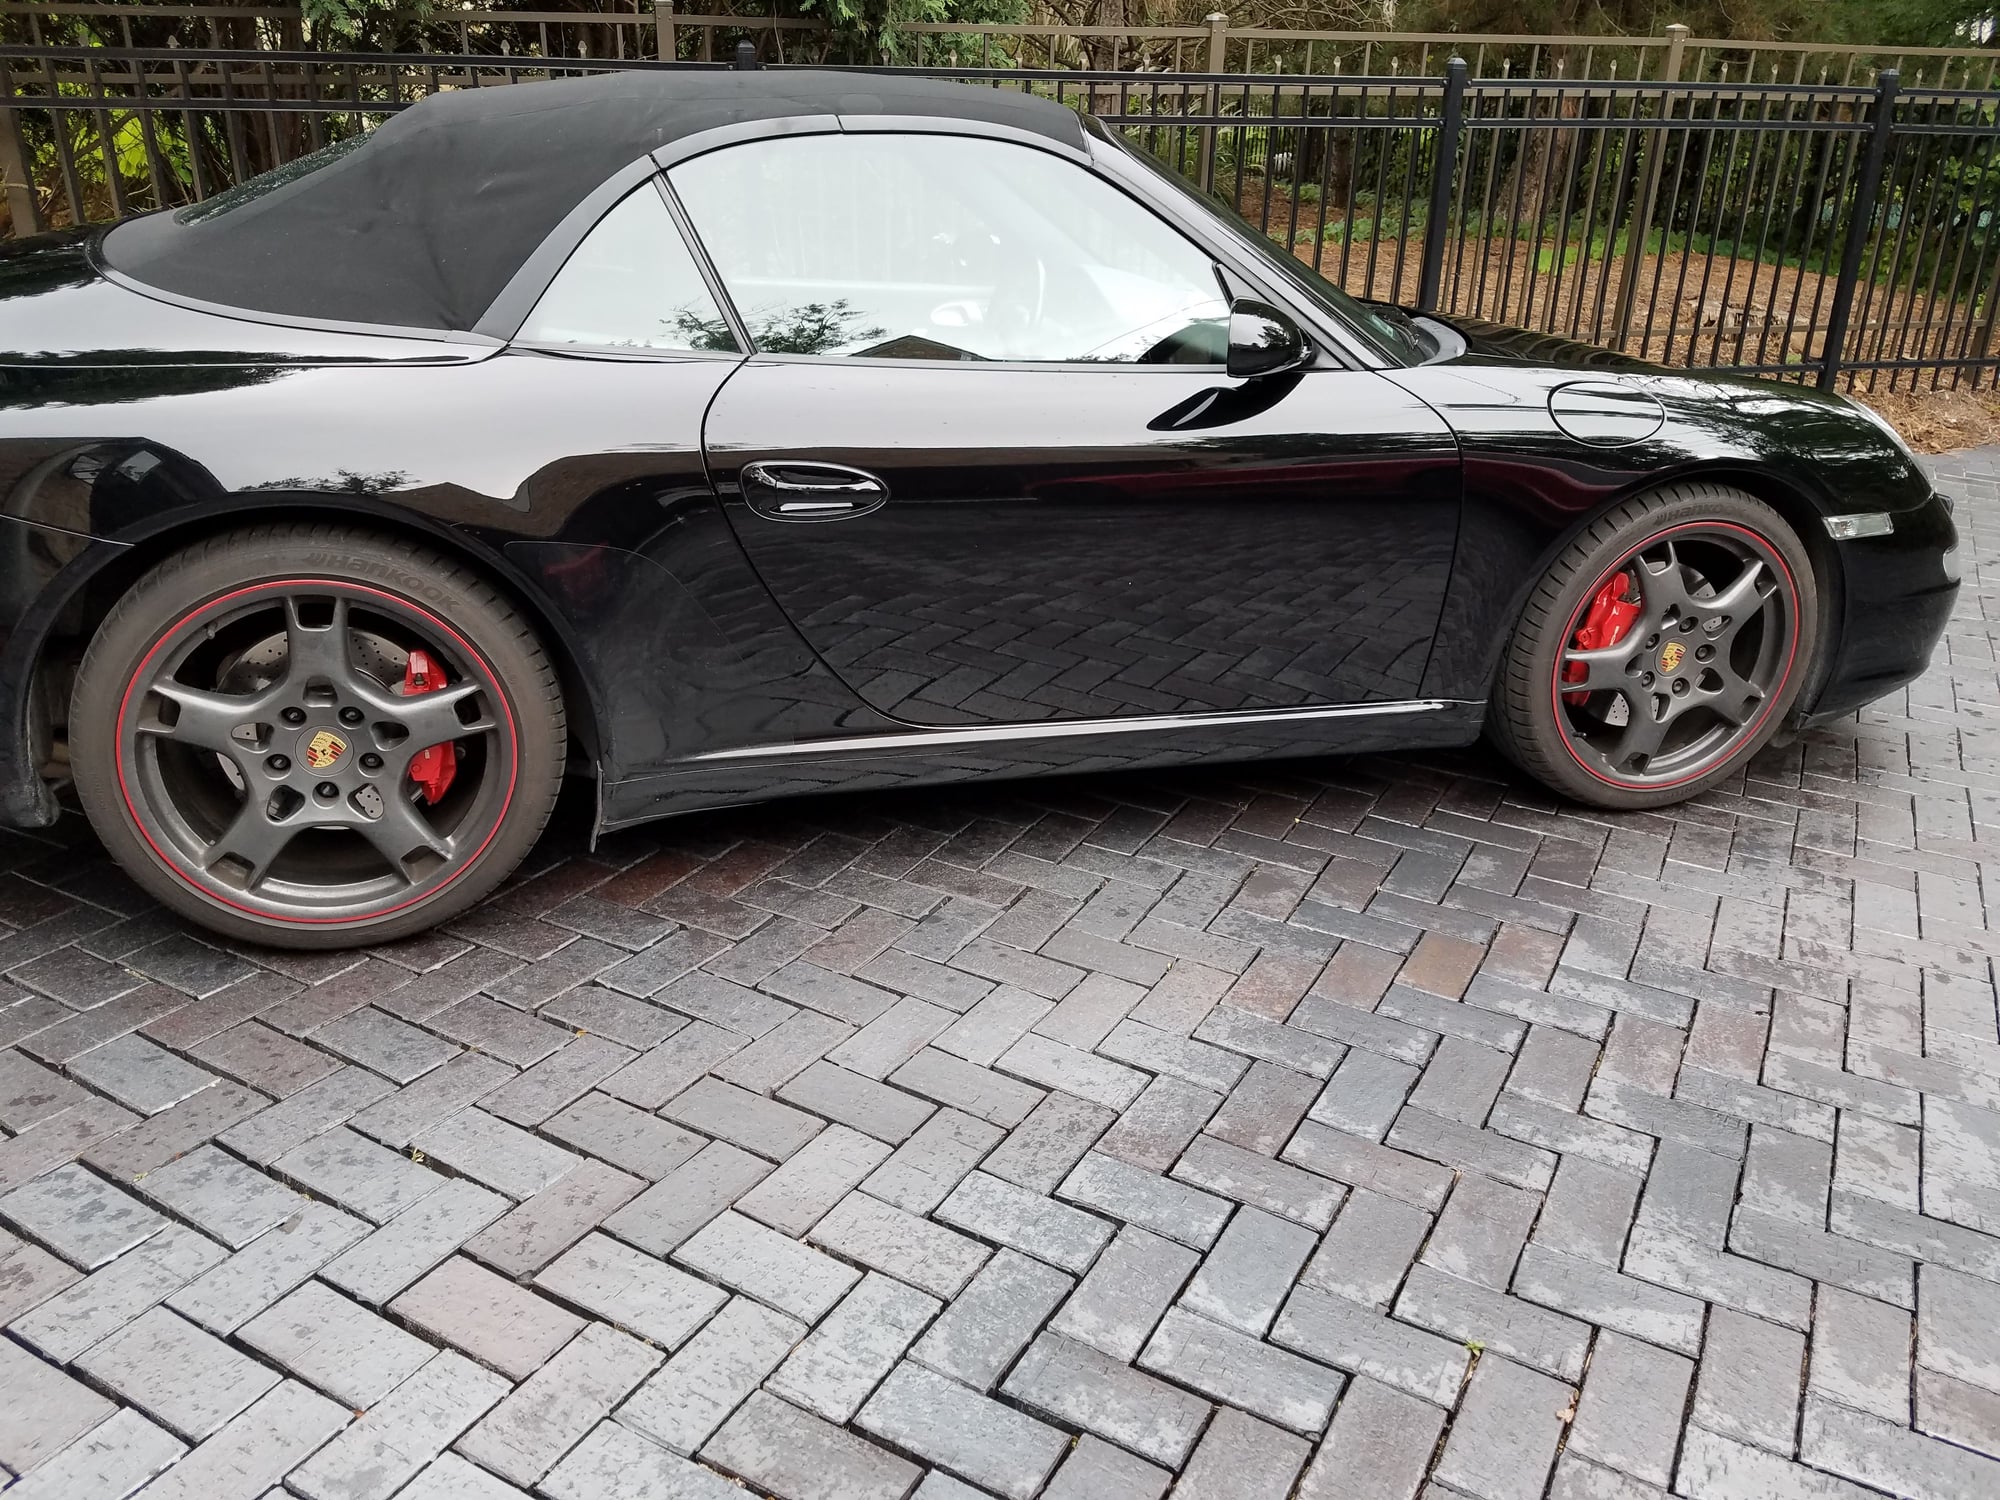 2006 Porsche 911 - 2006 997.1 S Cabriolet  Manual transmission - Used - VIN WP0CB29956S765156 - 6 cyl - 2WD - Manual - Convertible - Black - Hinsdale, IL 60521, United States